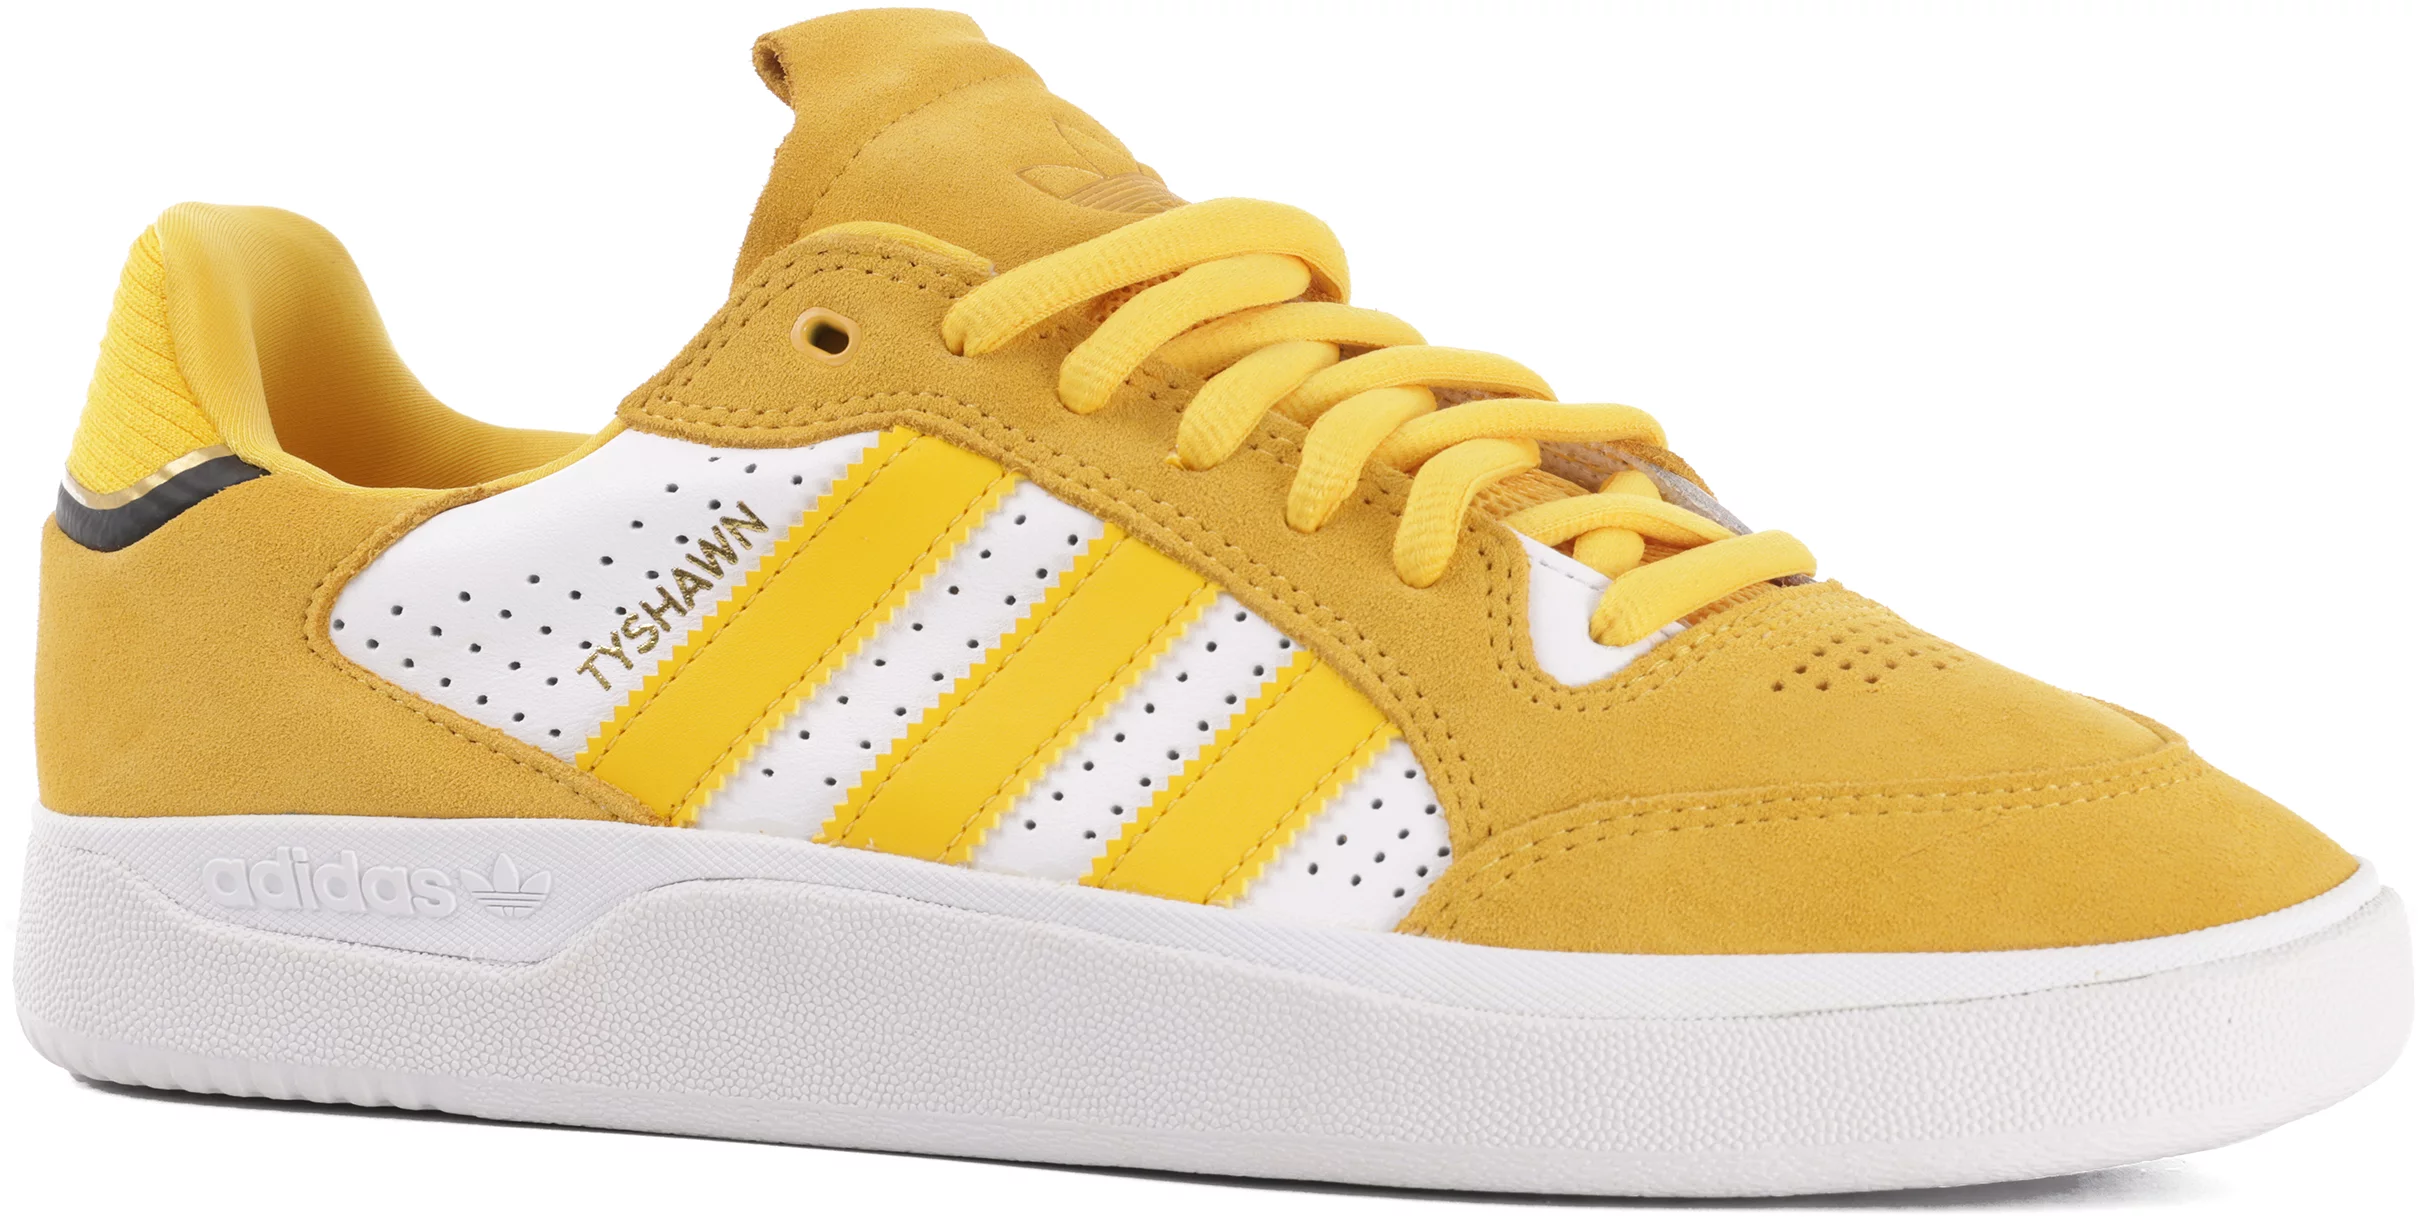 Adidas Tyshawn Low Skate Shoes bold gold/footwear white/core black Free Shipping | Tactics